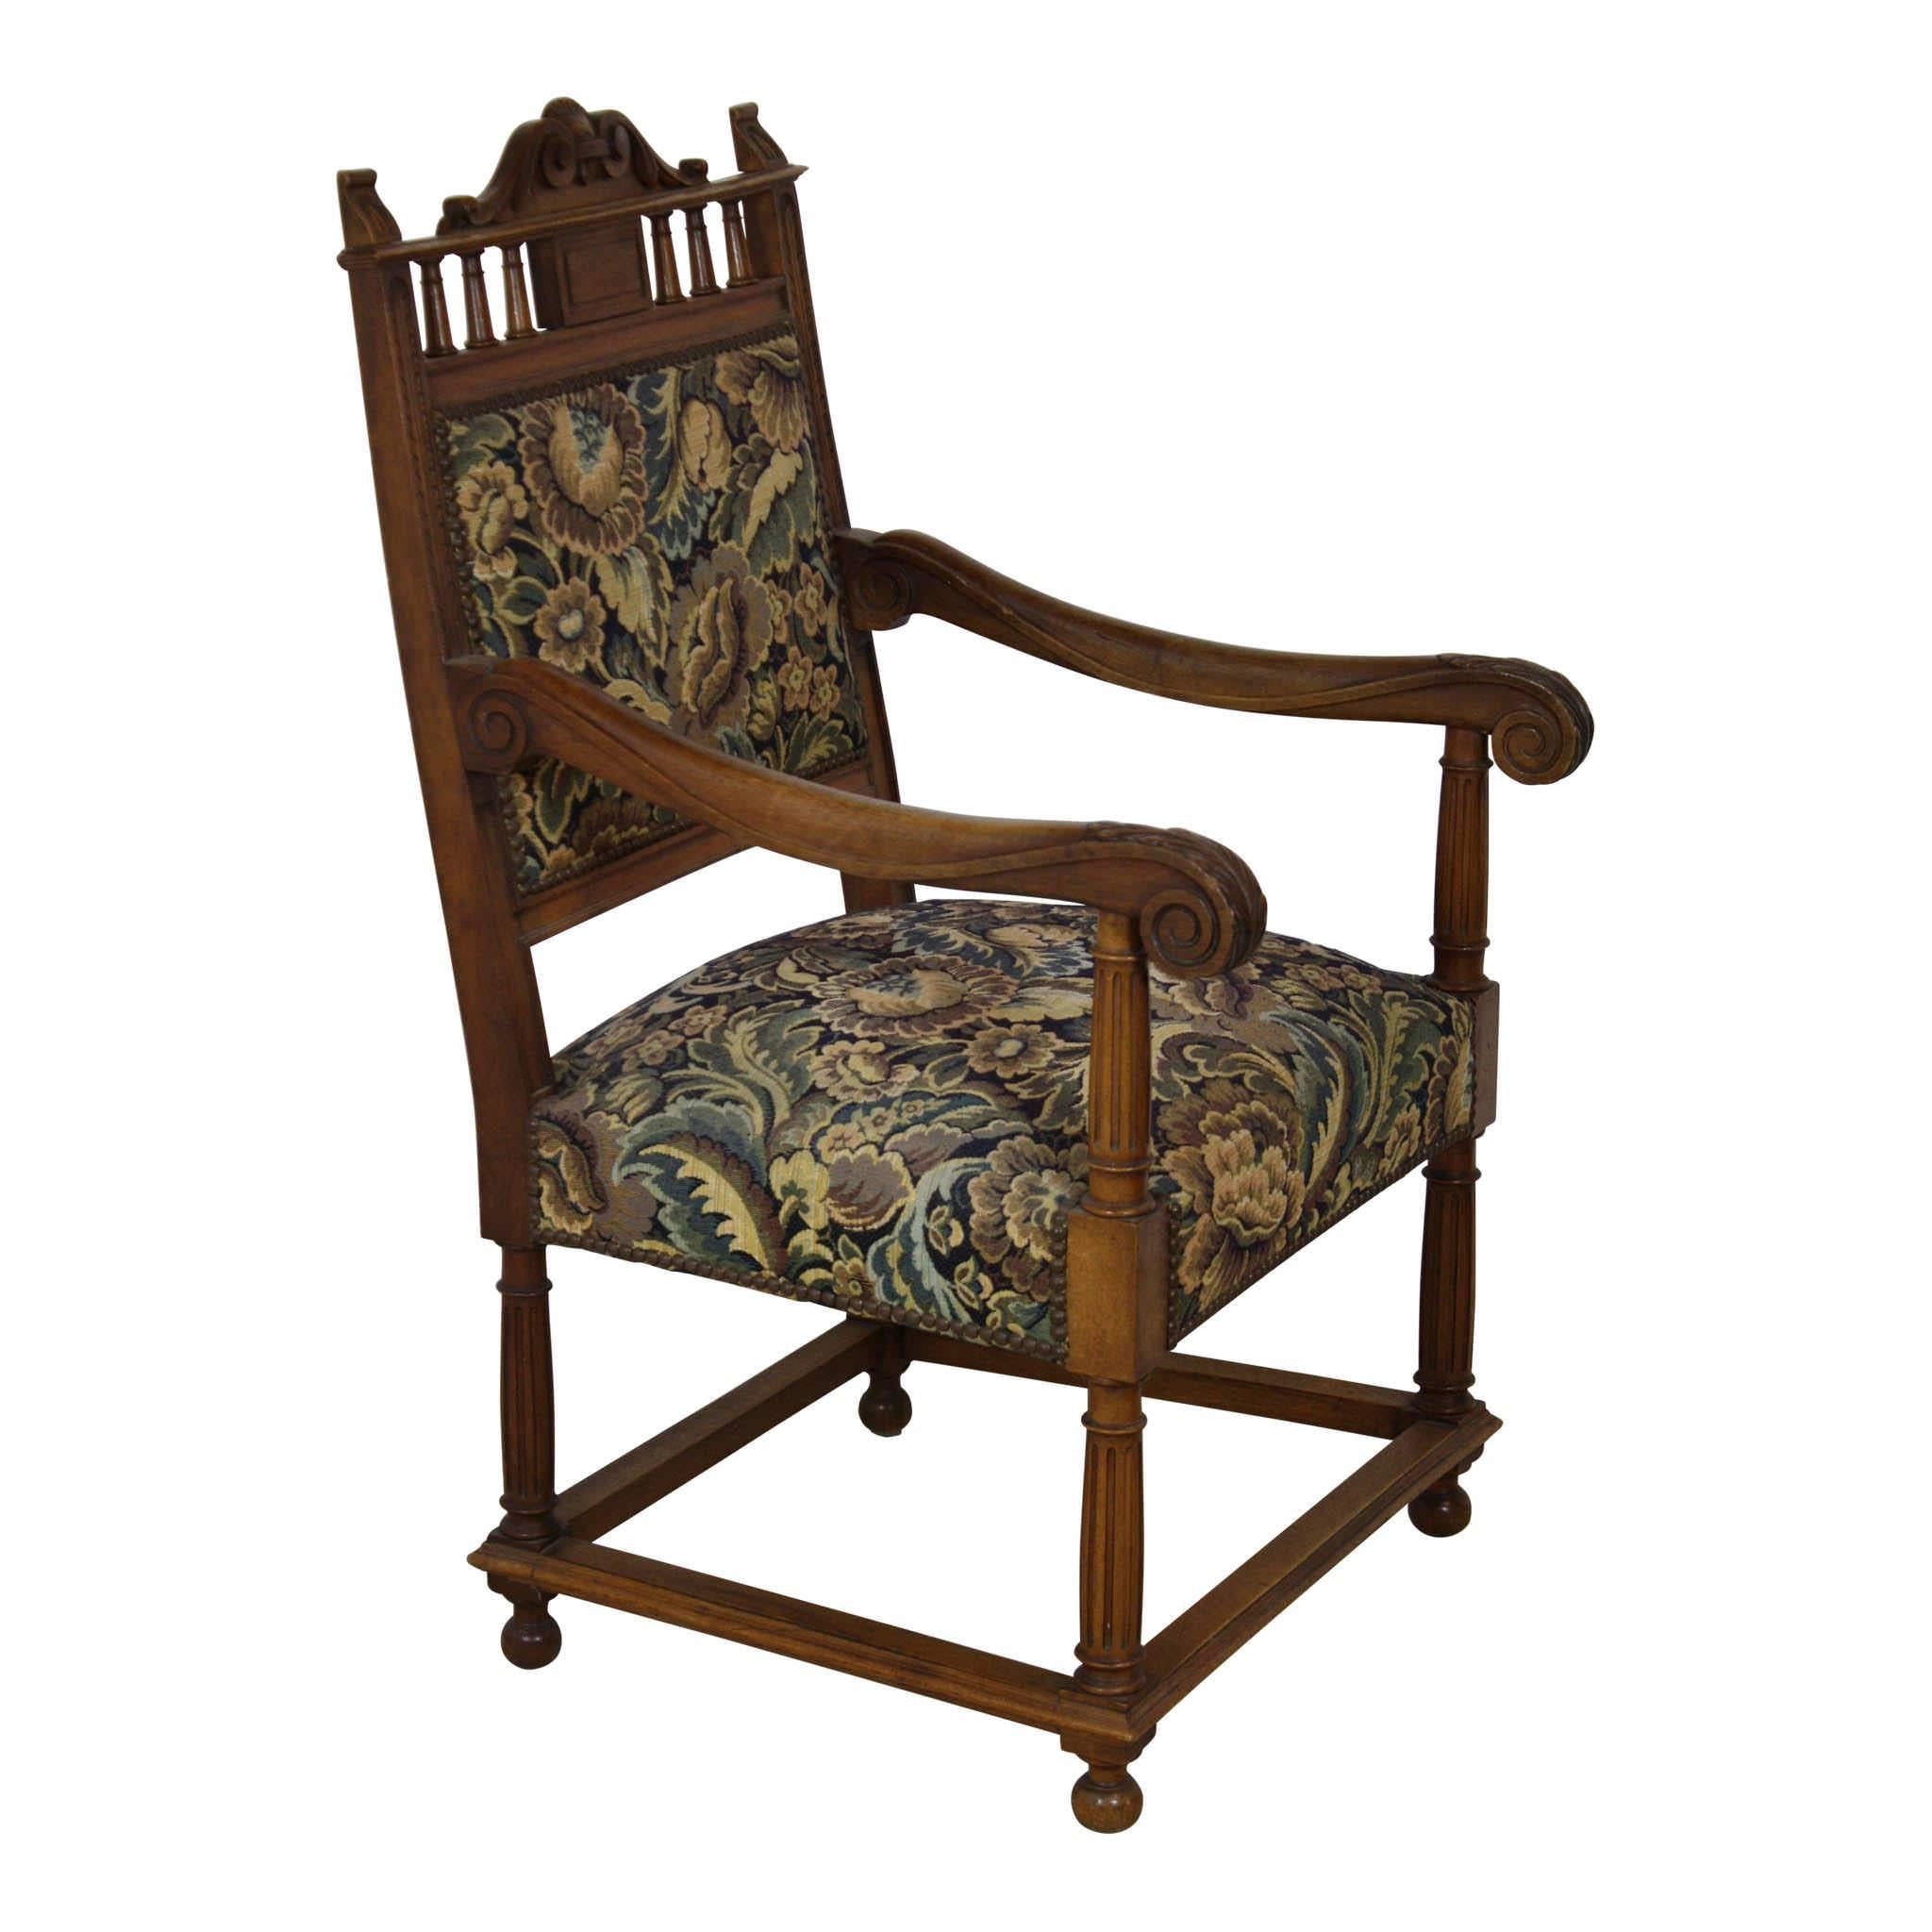 Solid and elegant, this set of walnut armchairs is well constructed with high backs, deep seats, and reinforced legs. The chair backs are crowned with a carved shell above small spindles. Acanthus leaves adorn the front of the scrolled arms. The